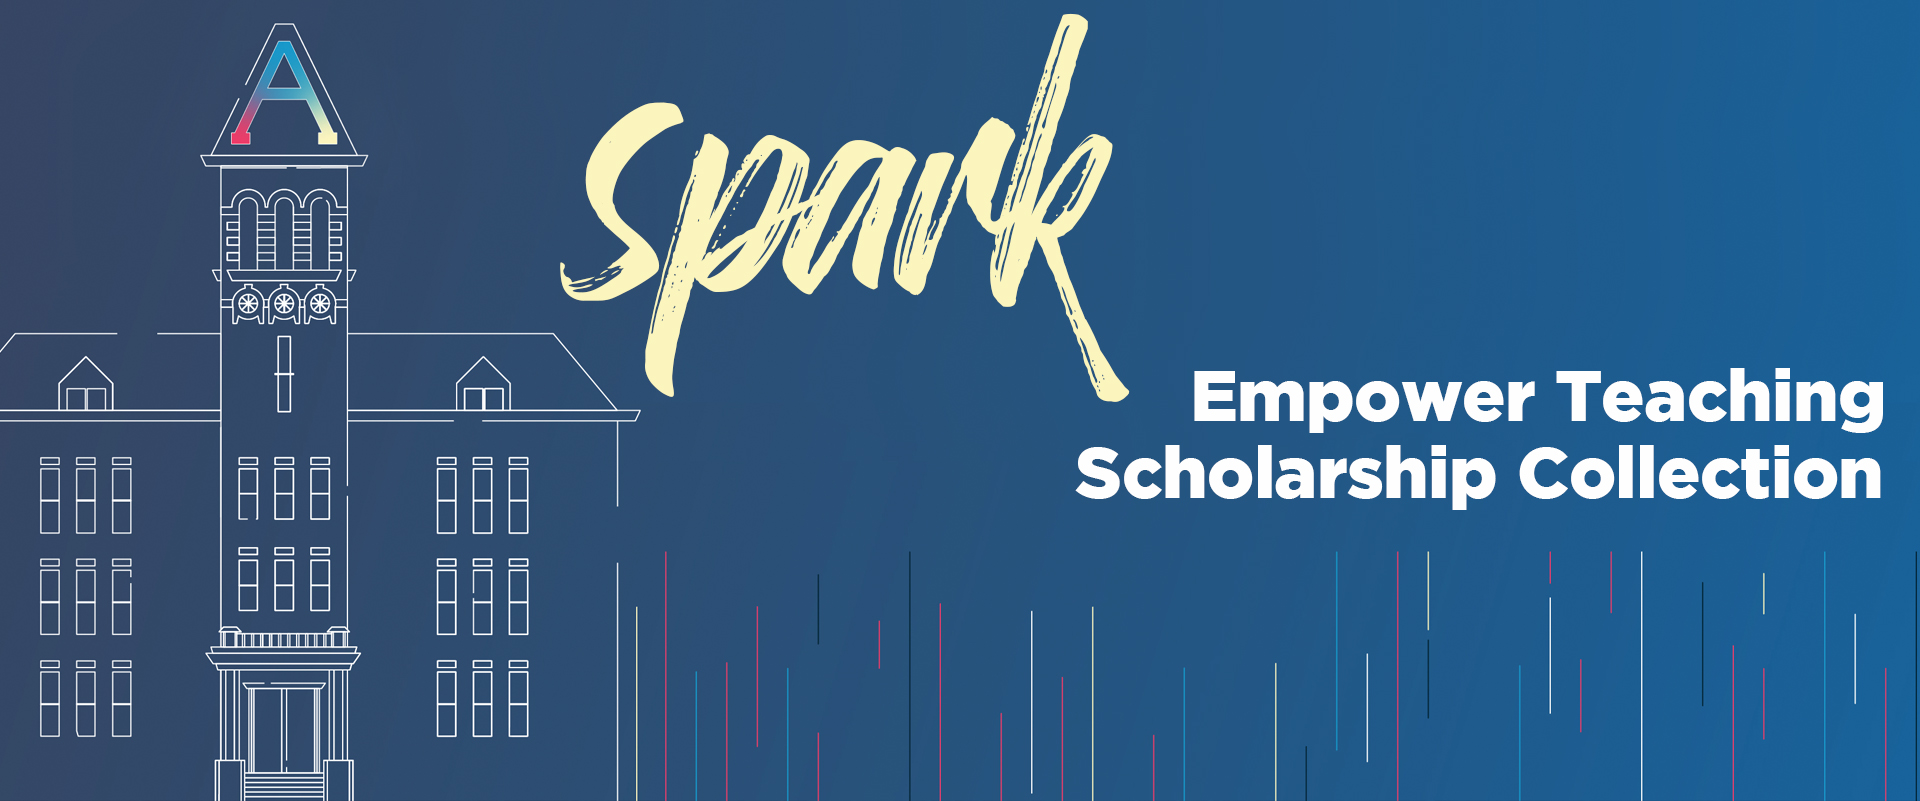 Spark - Empower Teaching Scholarship Collection